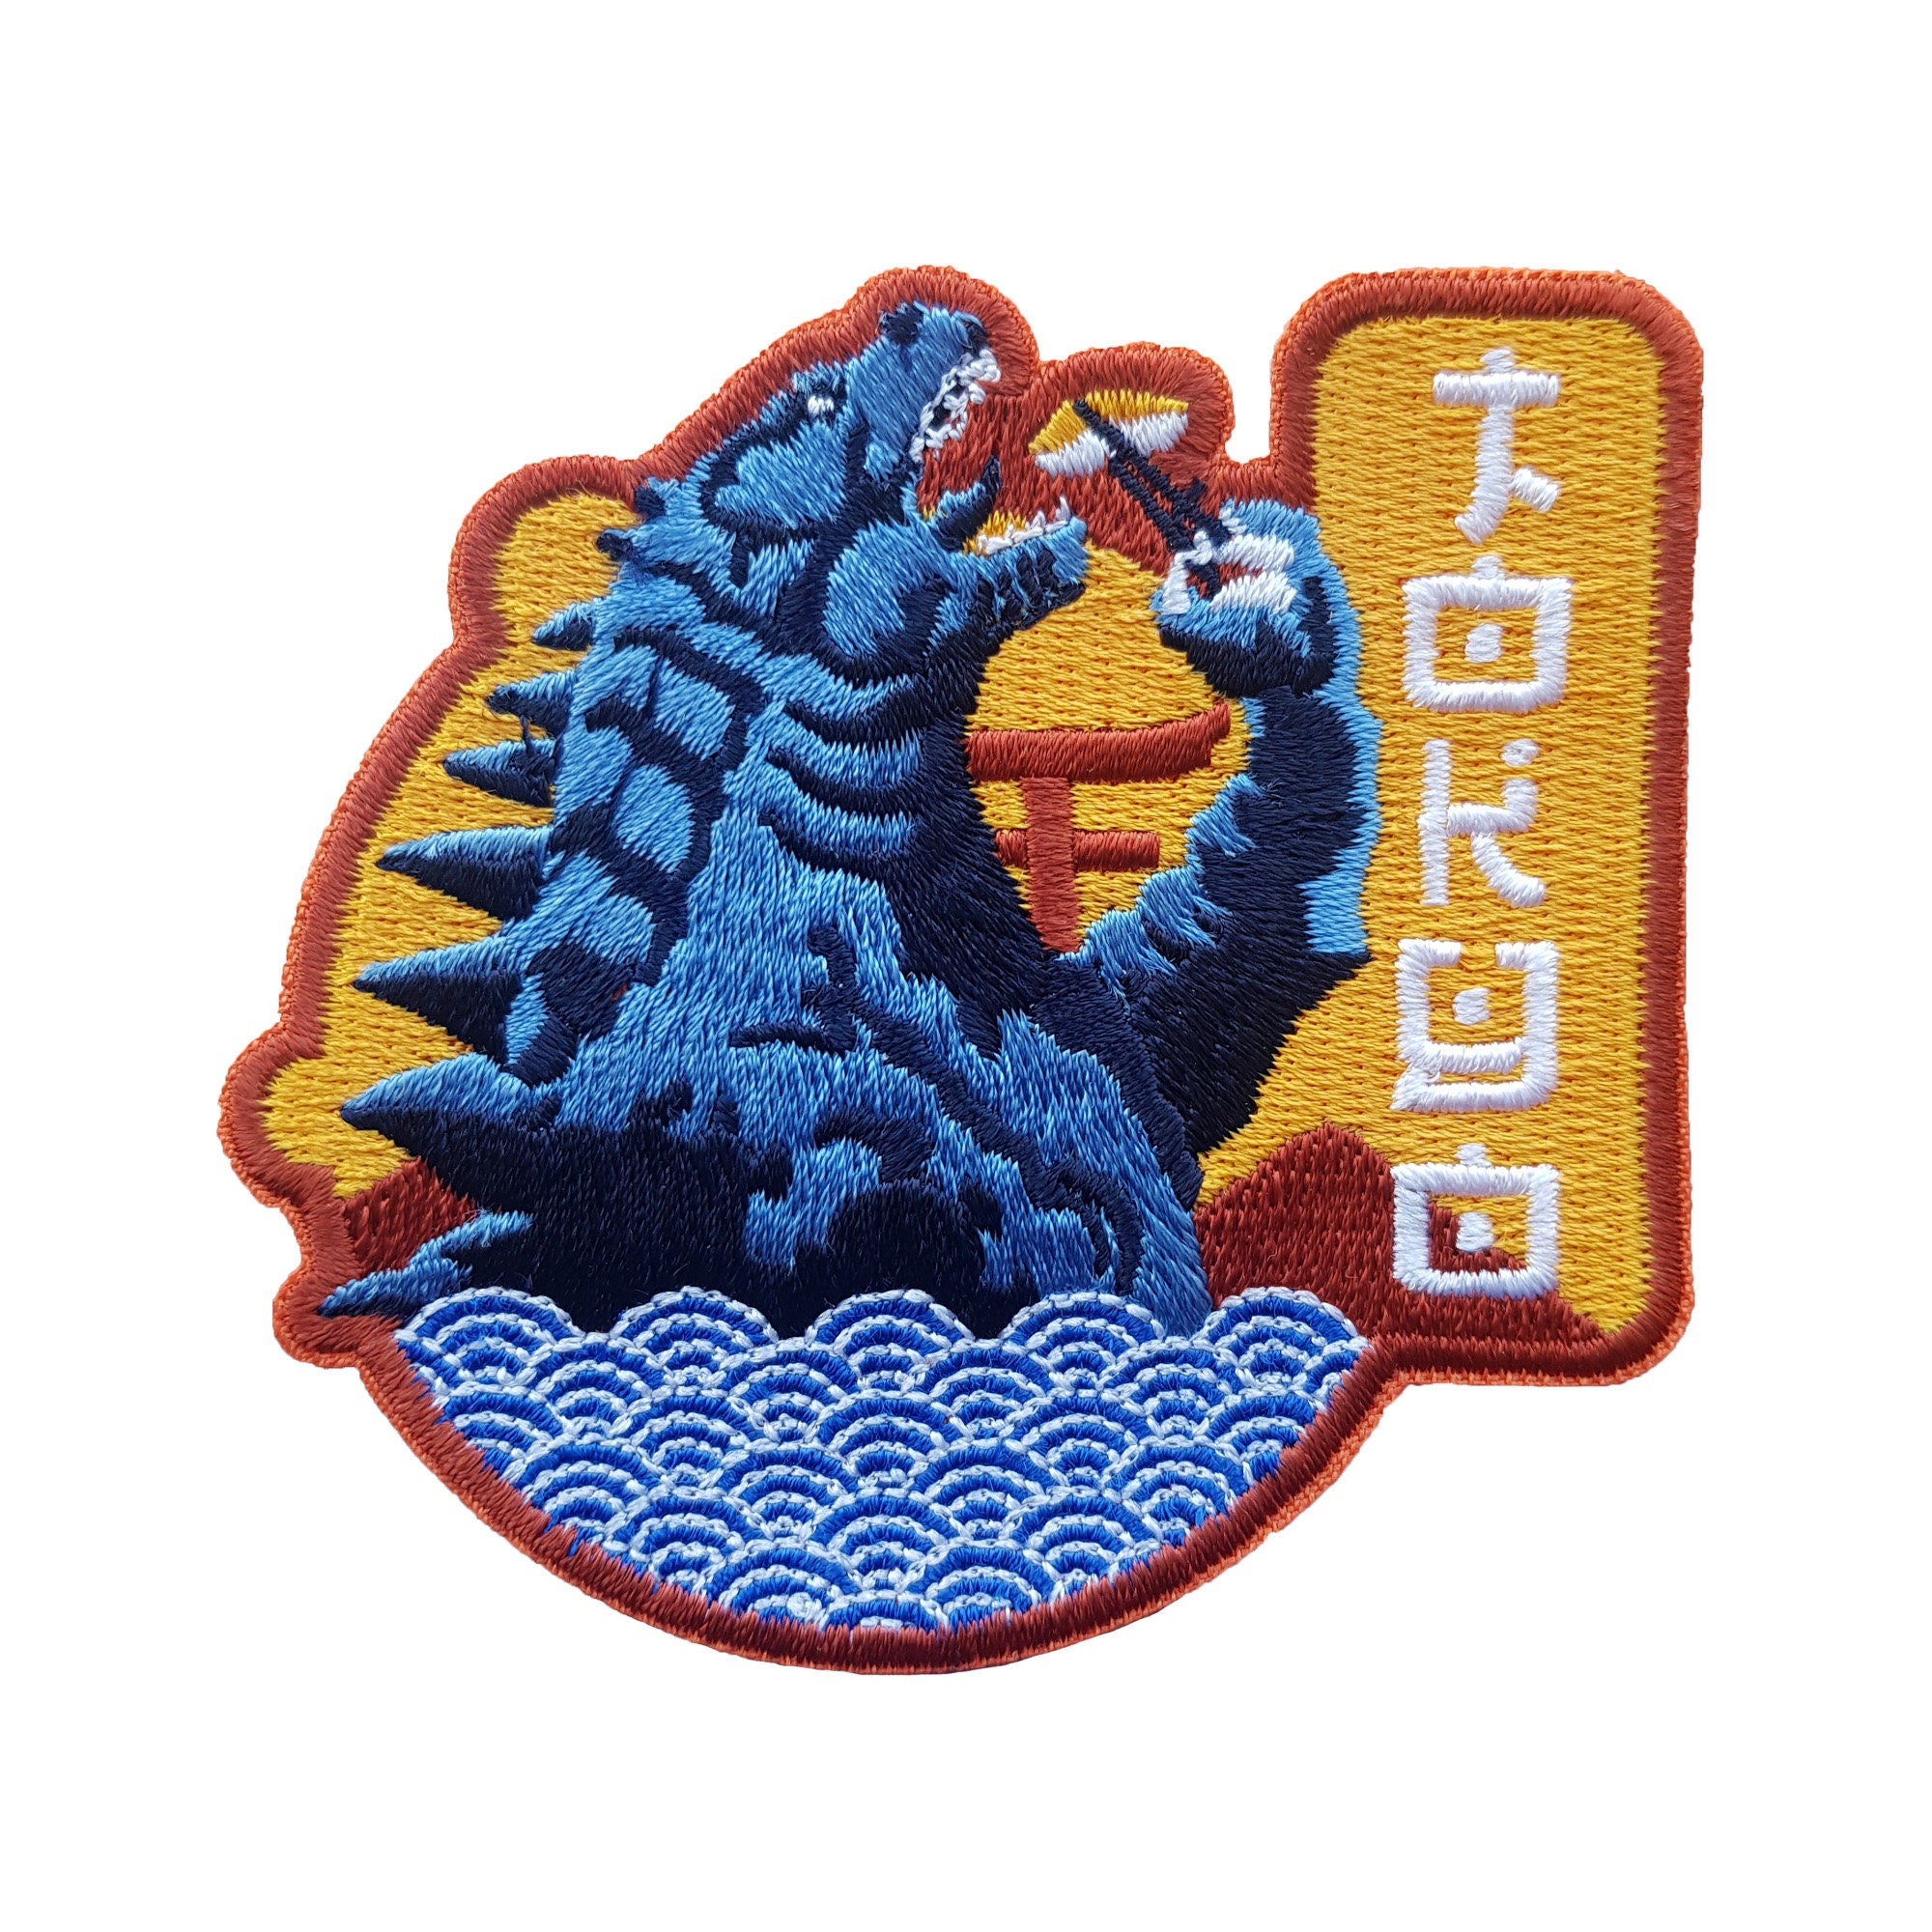 3 Anime Iron on Patch / Patches for Jackets / Embroidery Patch